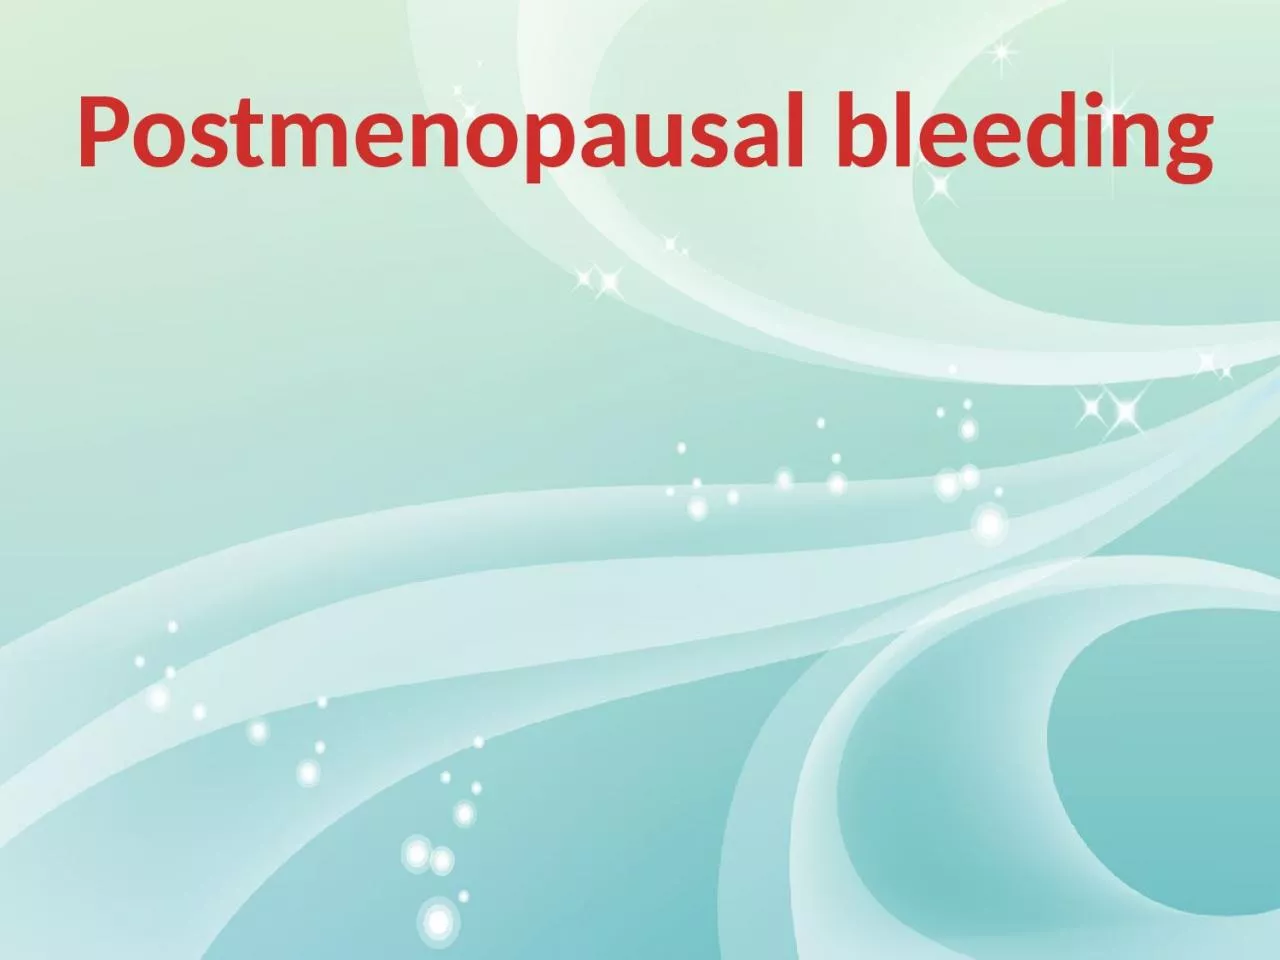 Postmenopausal bleeding 55 year –old female presented to you with history of vaginal